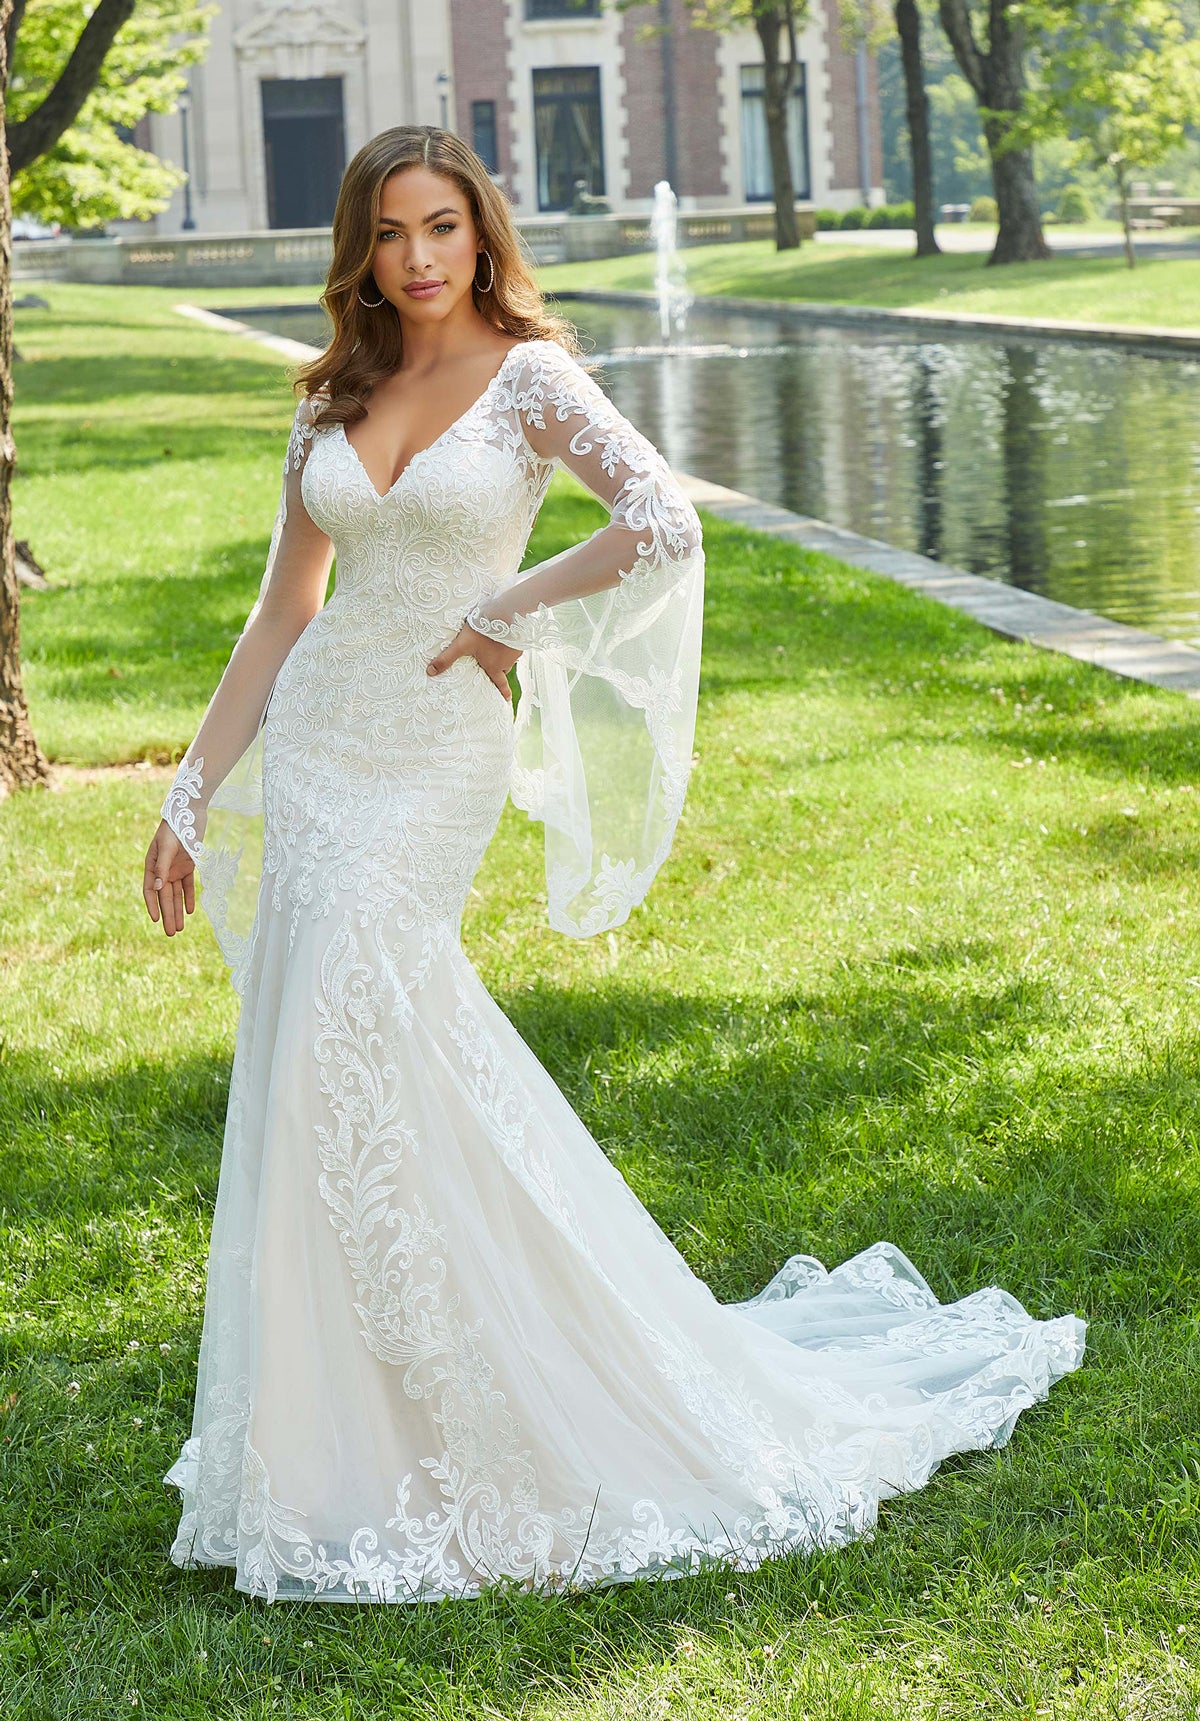 Voyage - 6962 - Dixie - Cheron's Bridal, Wedding Gown - Morilee Voyage - - Wedding Gowns Dresses Chattanooga Hixson Shops Boutiques Tennessee TN Georgia GA MSRP Lowest Prices Sale Discount